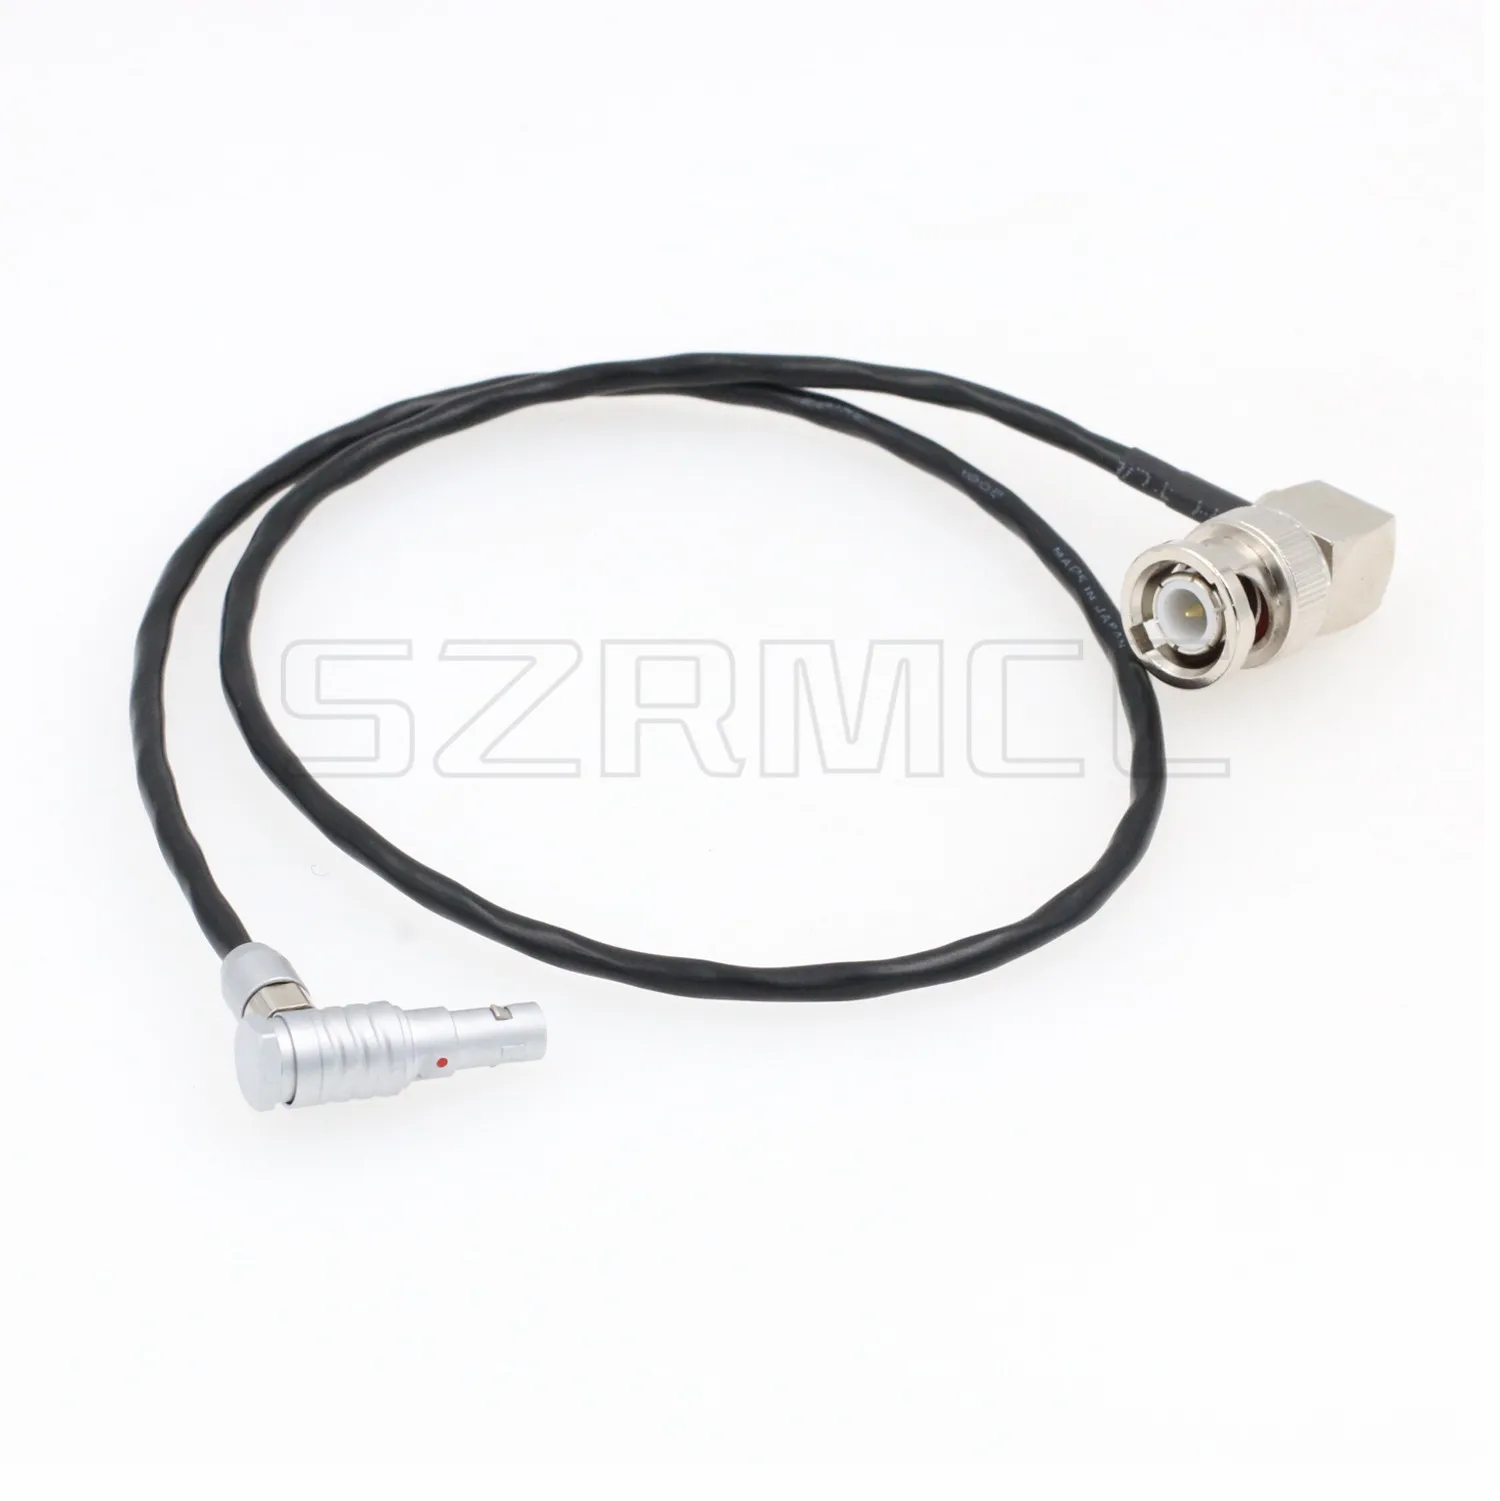 

Time Code Input Cable for Red Epic Scarlet DSMC2 Camera Right Angle 00B 4 Pin Male to BNC Male